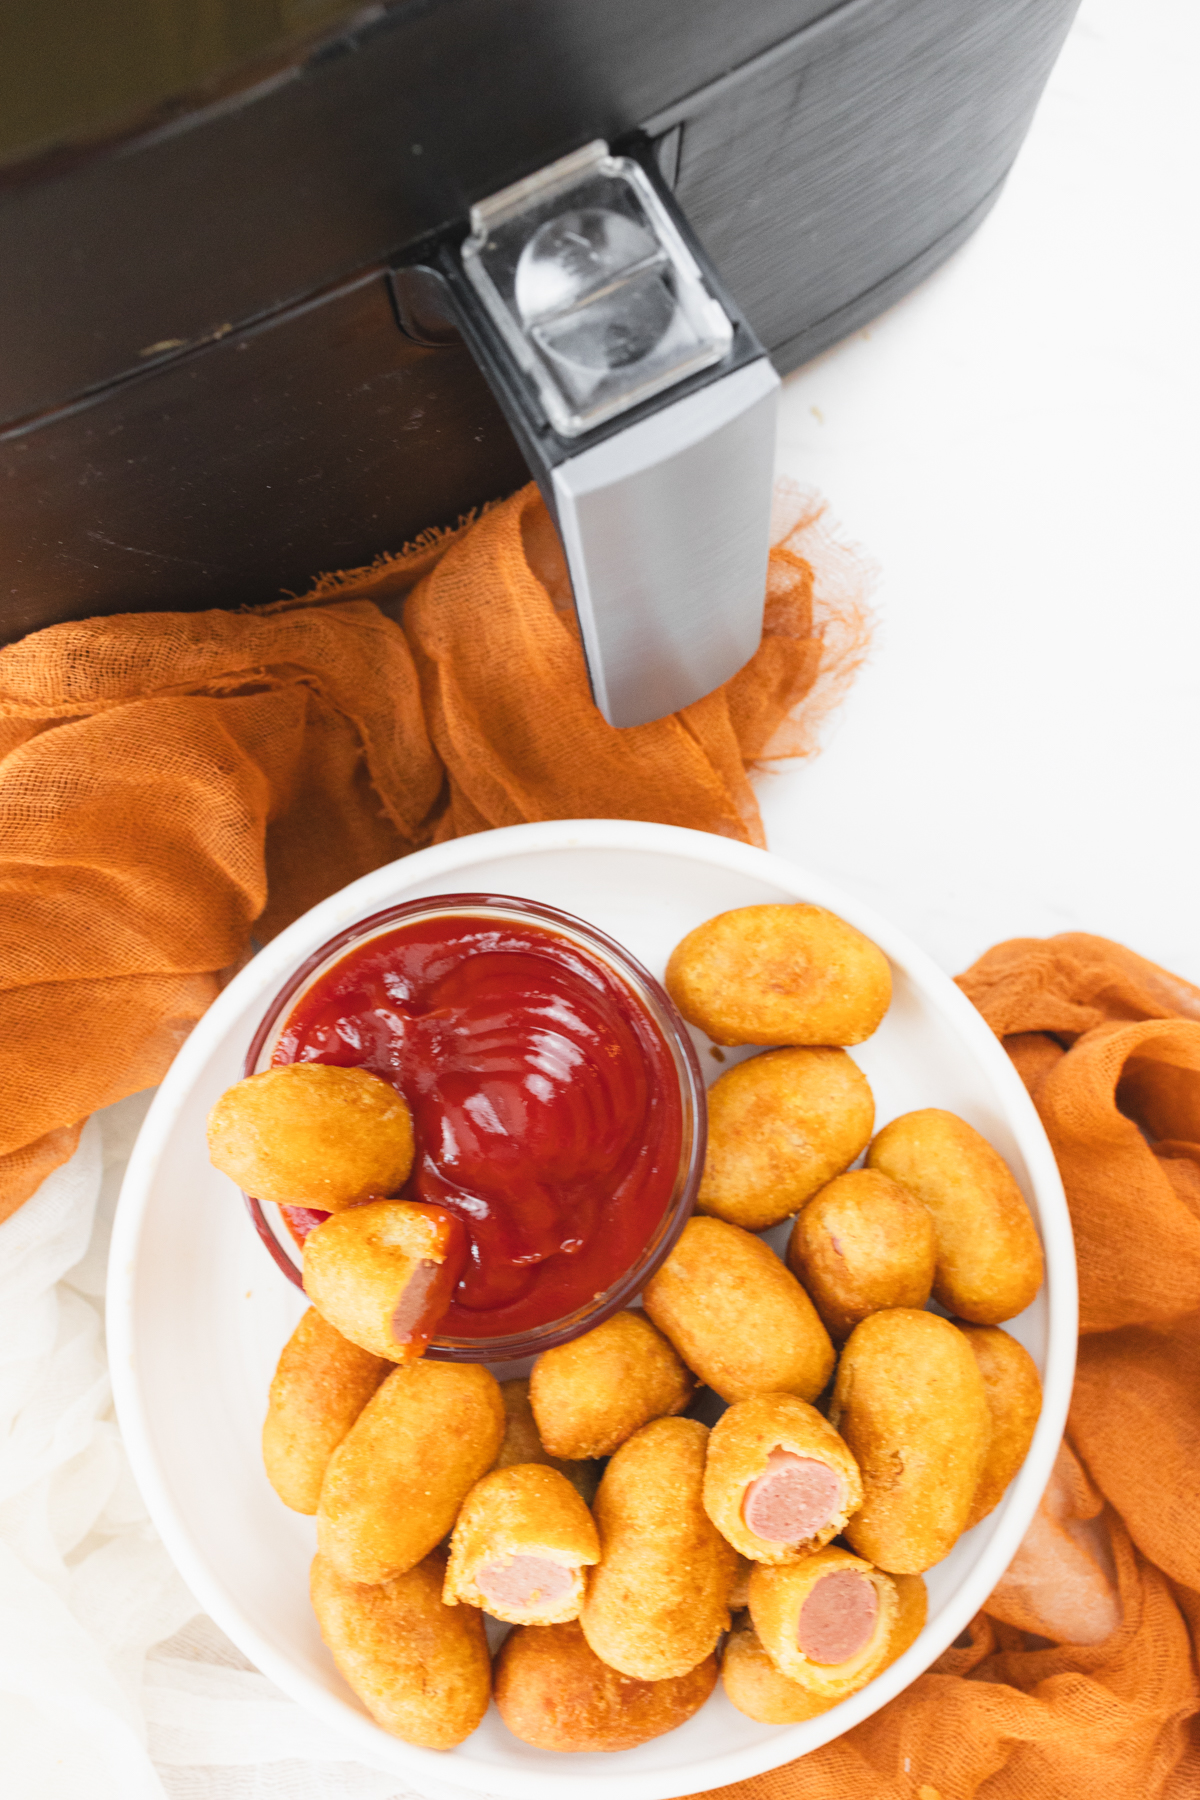 Close view of cooked mini corn dogs on a white plate that has a small dipping bowl of ketchup on it. In the background is the air fryer.